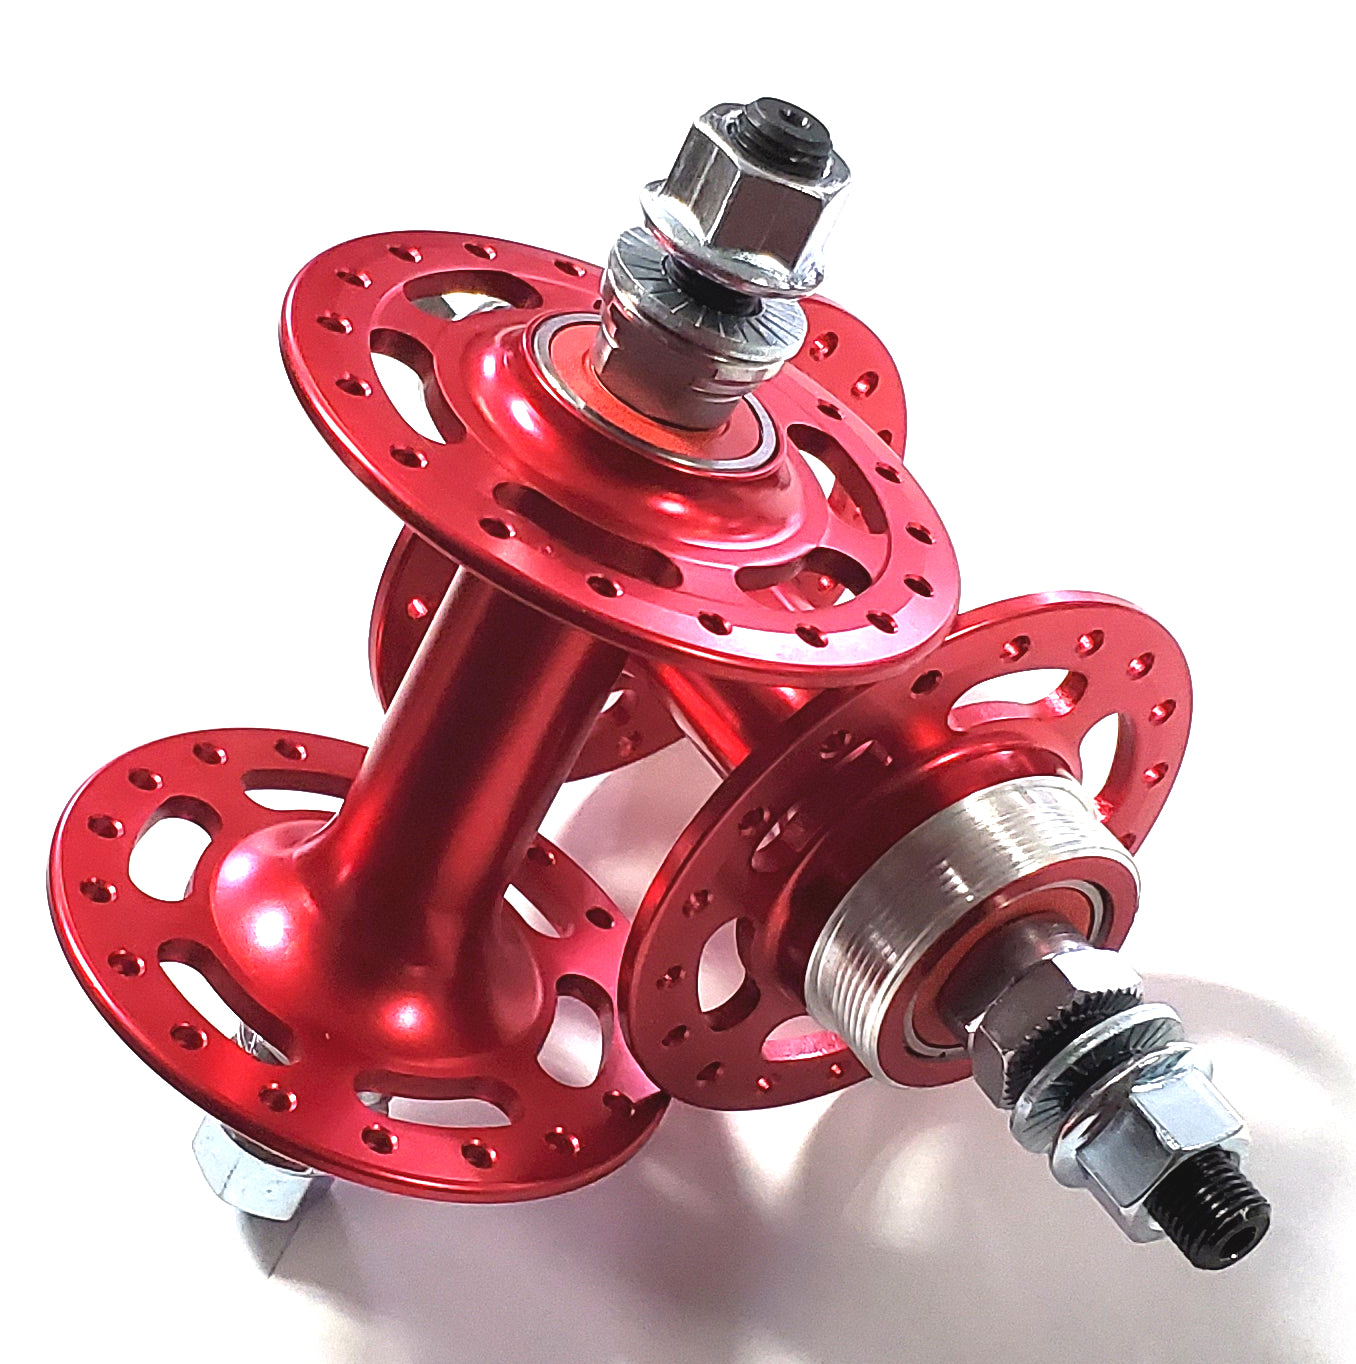 Retro Sealed High Flange w/ Cut-outs BMX Hubset - Red - 36h 3/8"